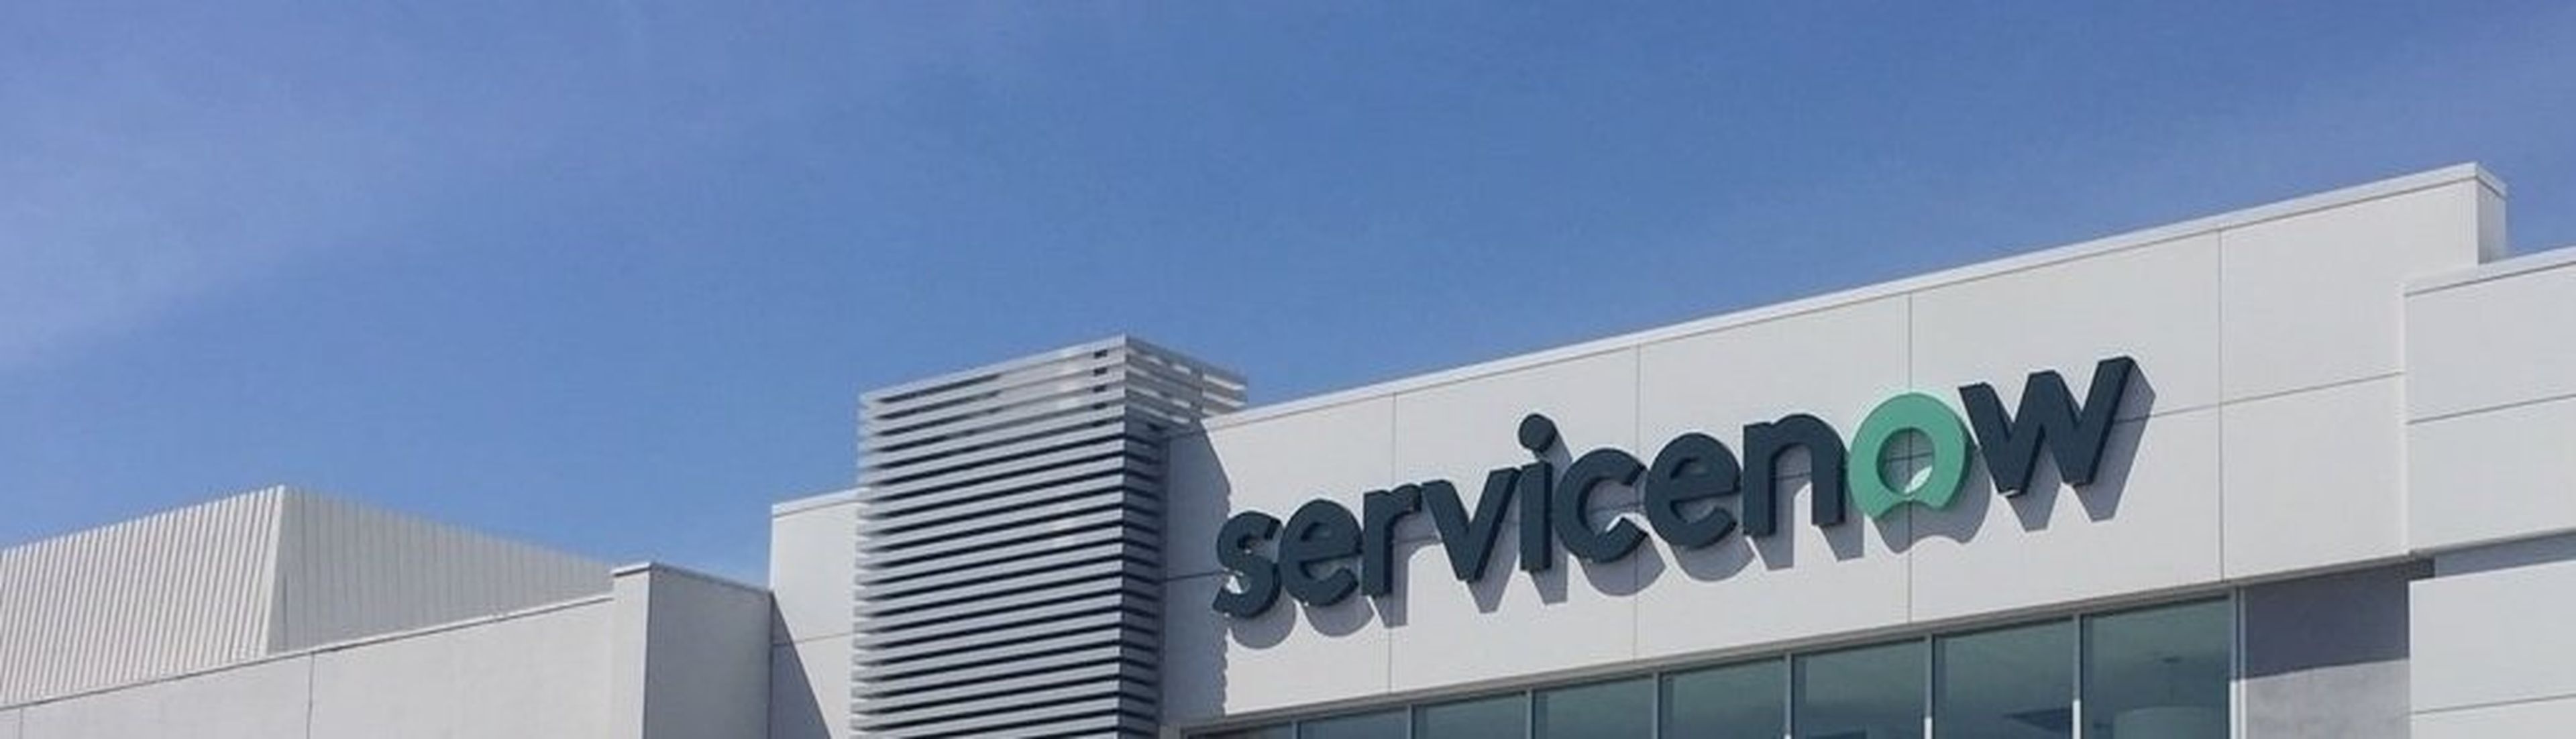 Hitch Works, Inc. (Acquired by ServiceNow)